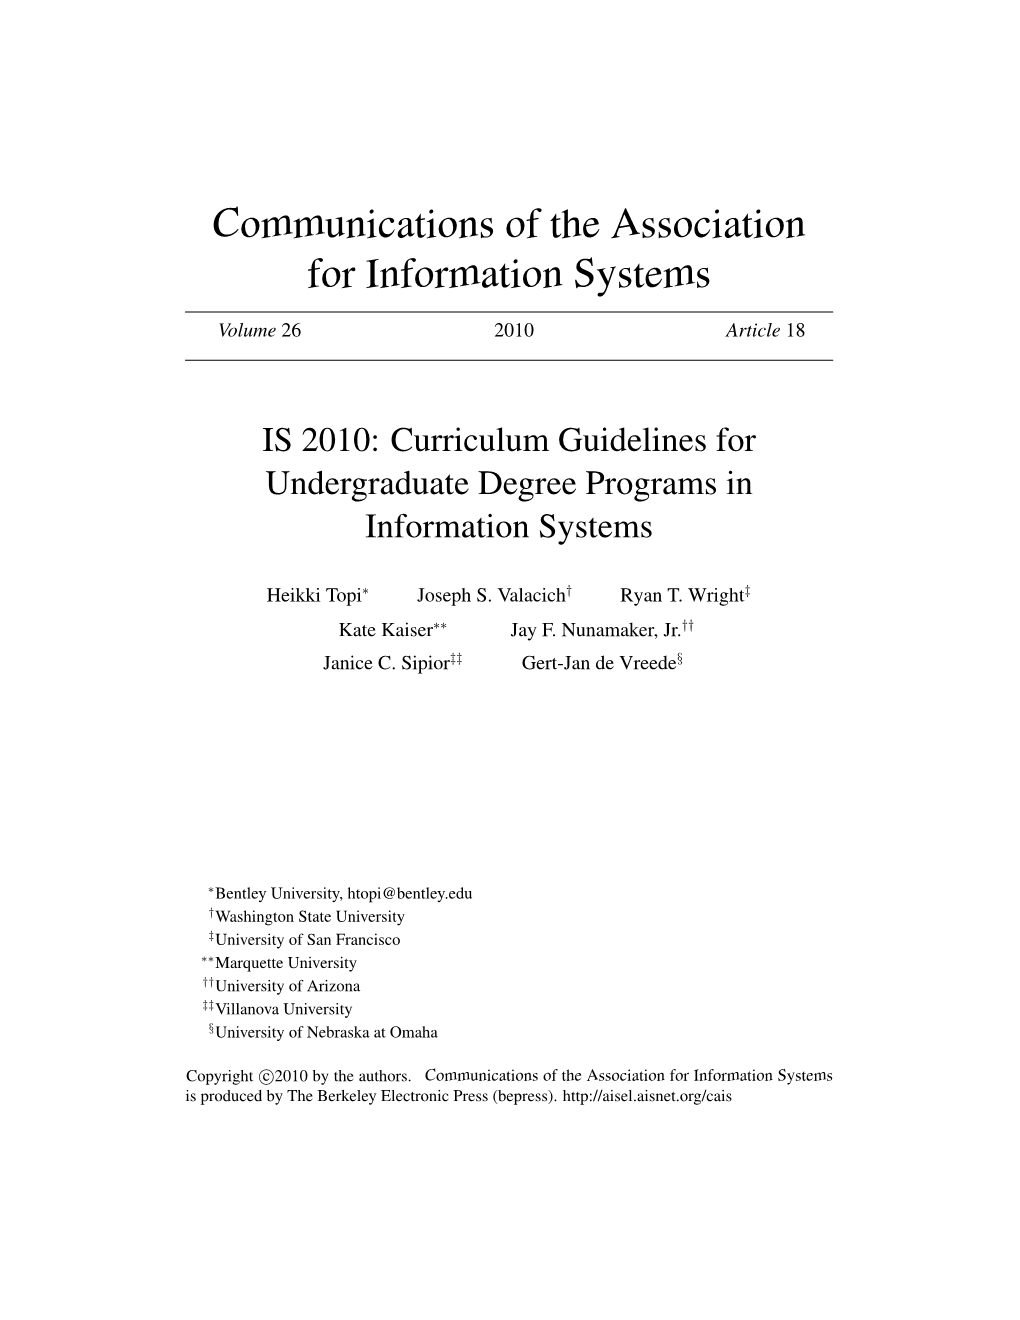 Curriculum Guidelines for Undergraduate Degree Programs in Information Systems